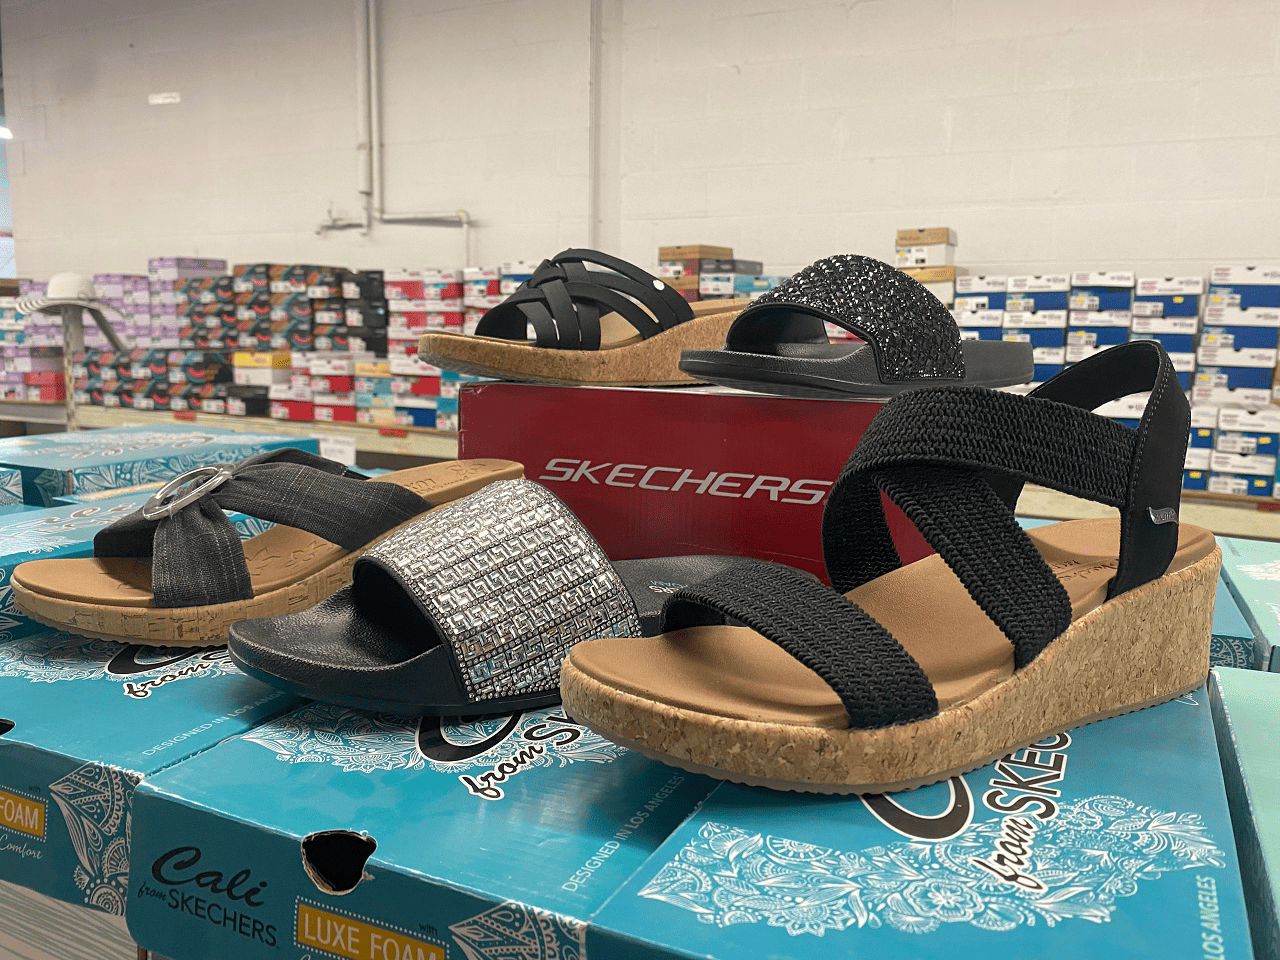 Huge warehouse sale in Mississauga offers big discounts on Skechers shoes and sandals